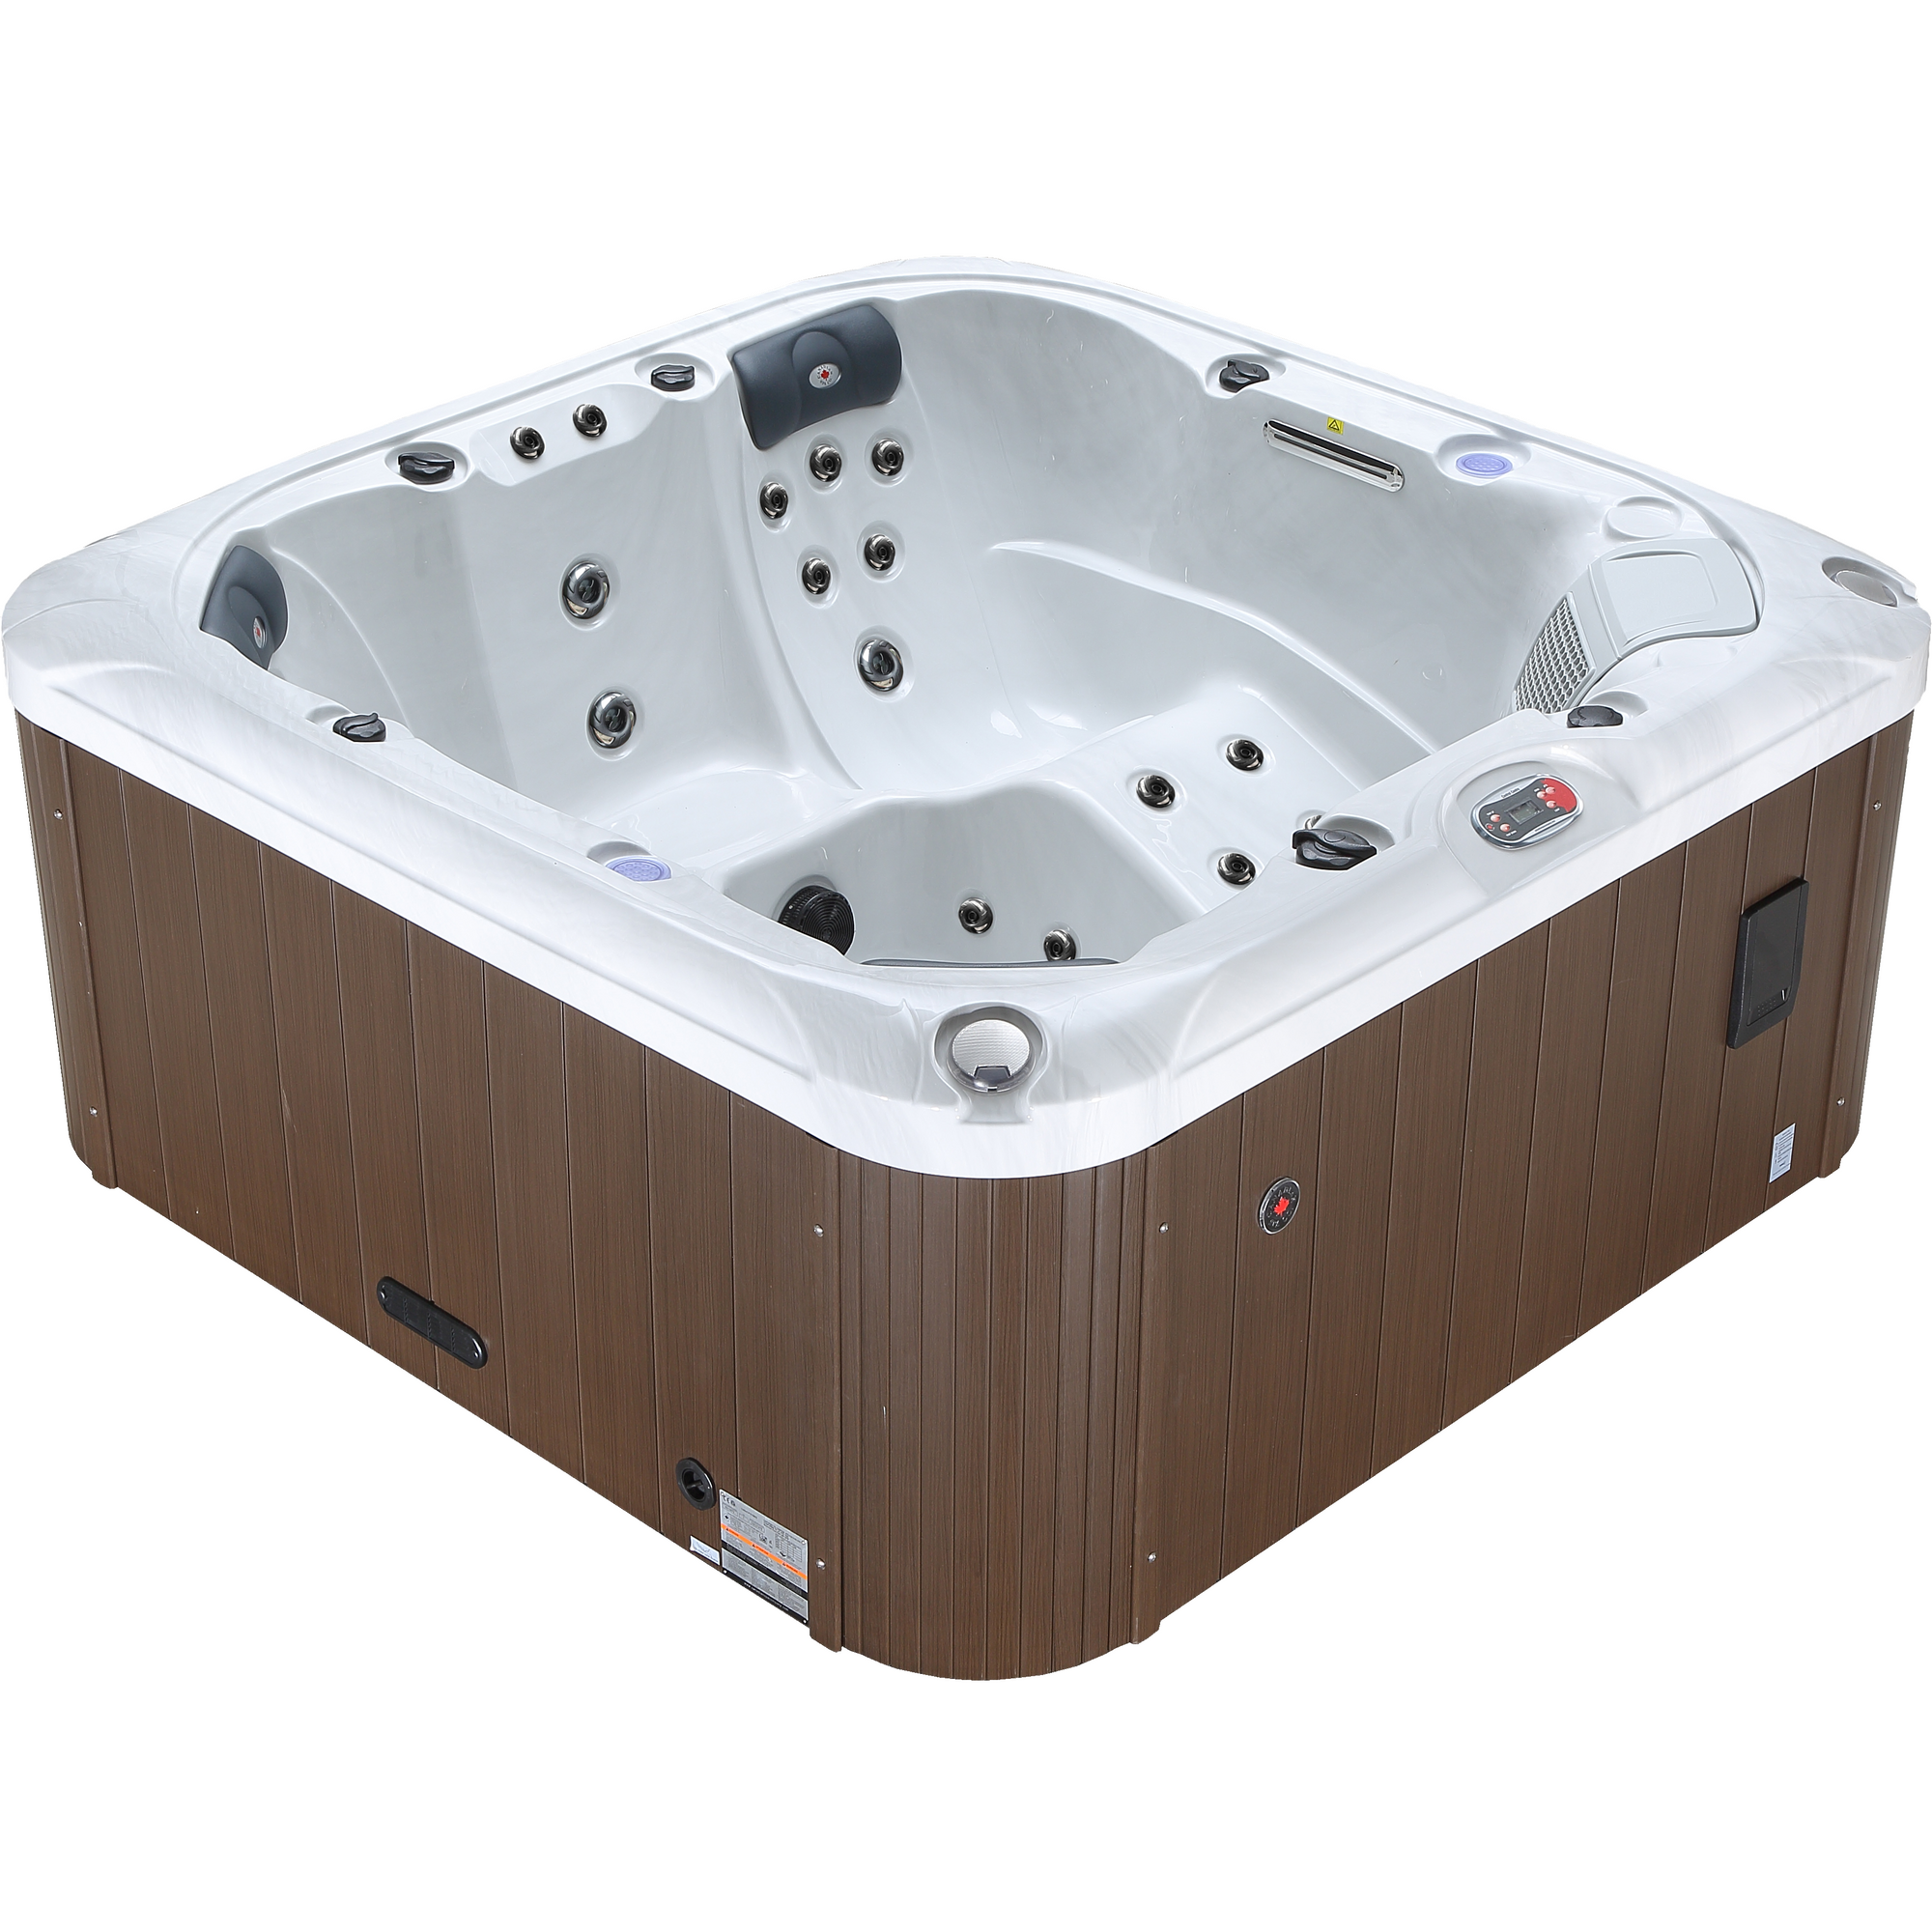 Canadian Spa Cambridge 6-Person 34-Jet Hot Tub - Acrylic - White inside - Brown outside - with adjustable hydrotherapy jets, LED lighting, bluetooth, waterfall, ozone, aroma, audio system - KH-10141 - Vital Hydrotherapy